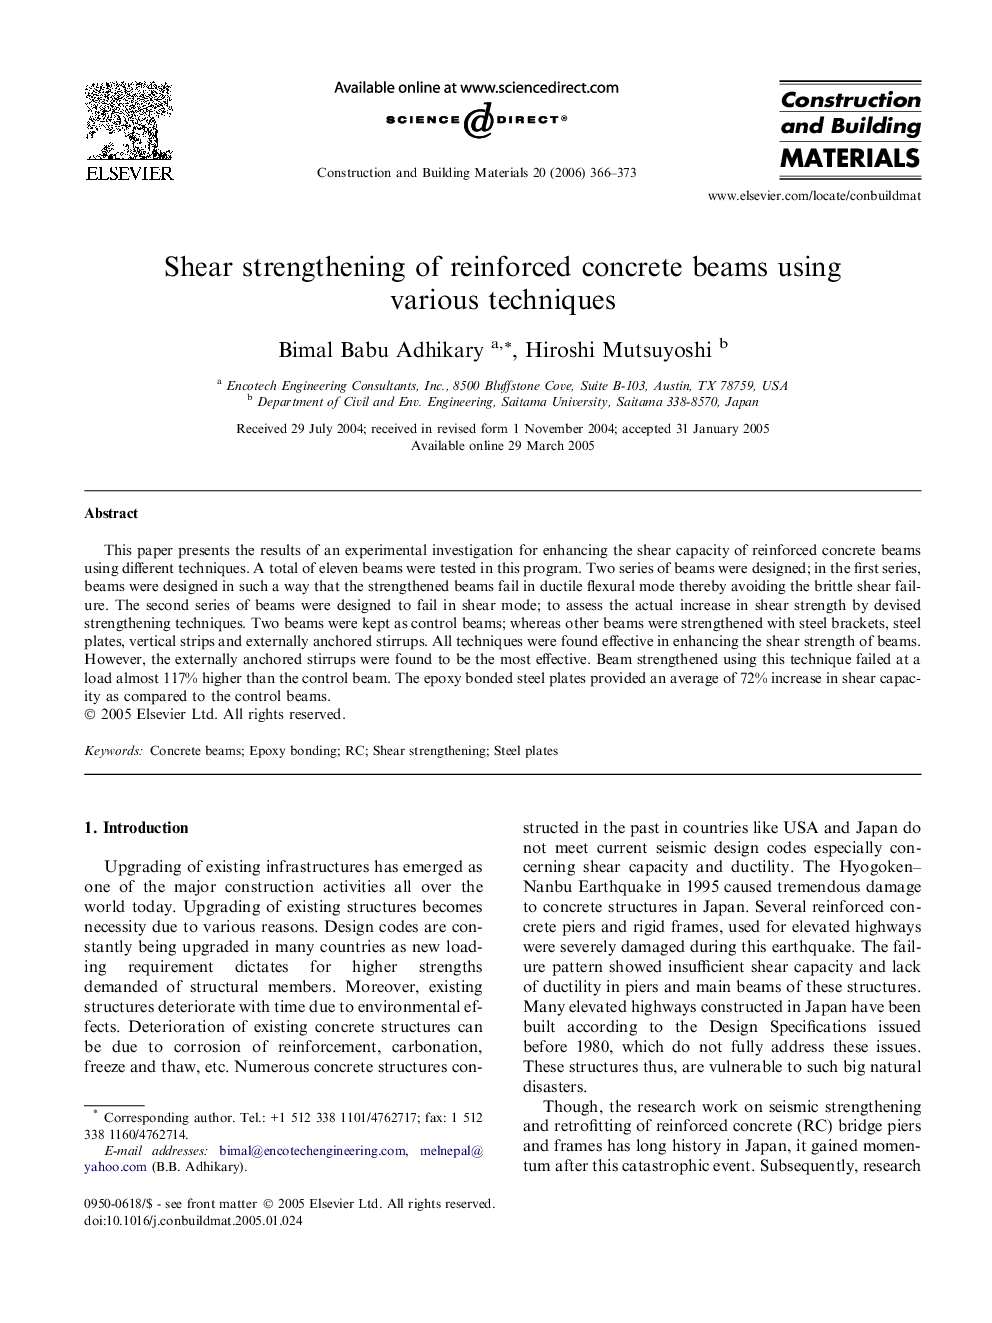 Shear strengthening of reinforced concrete beams using various techniques